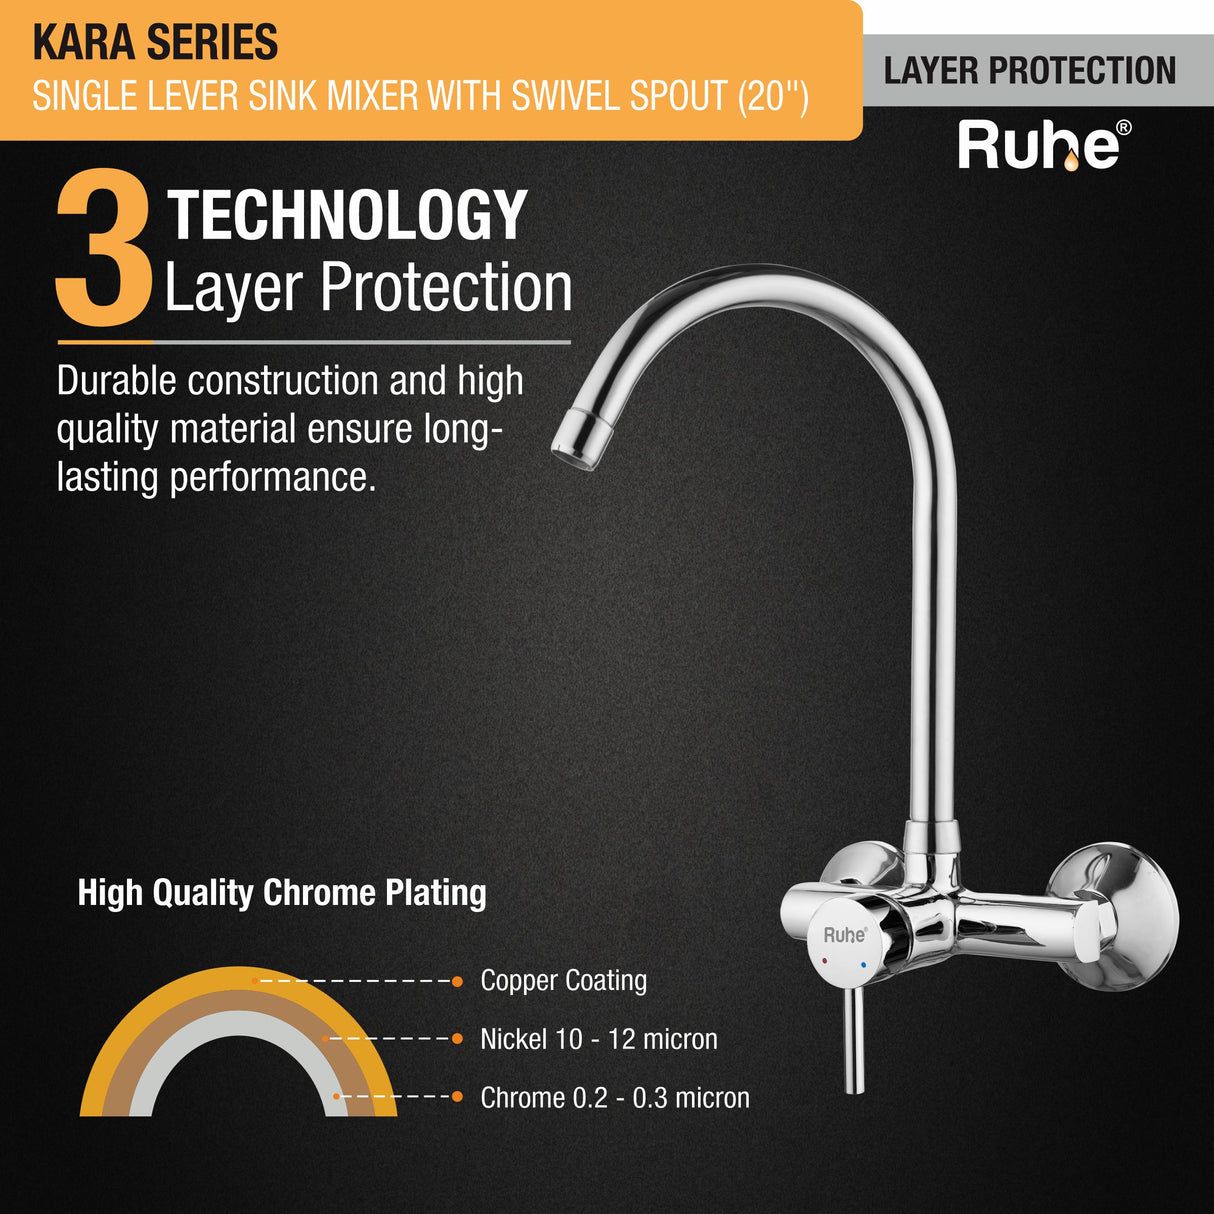 Kara Single Lever Wall-mount Brass Mixer Faucet with Swivel Spout (20 Inches) - by Ruhe®